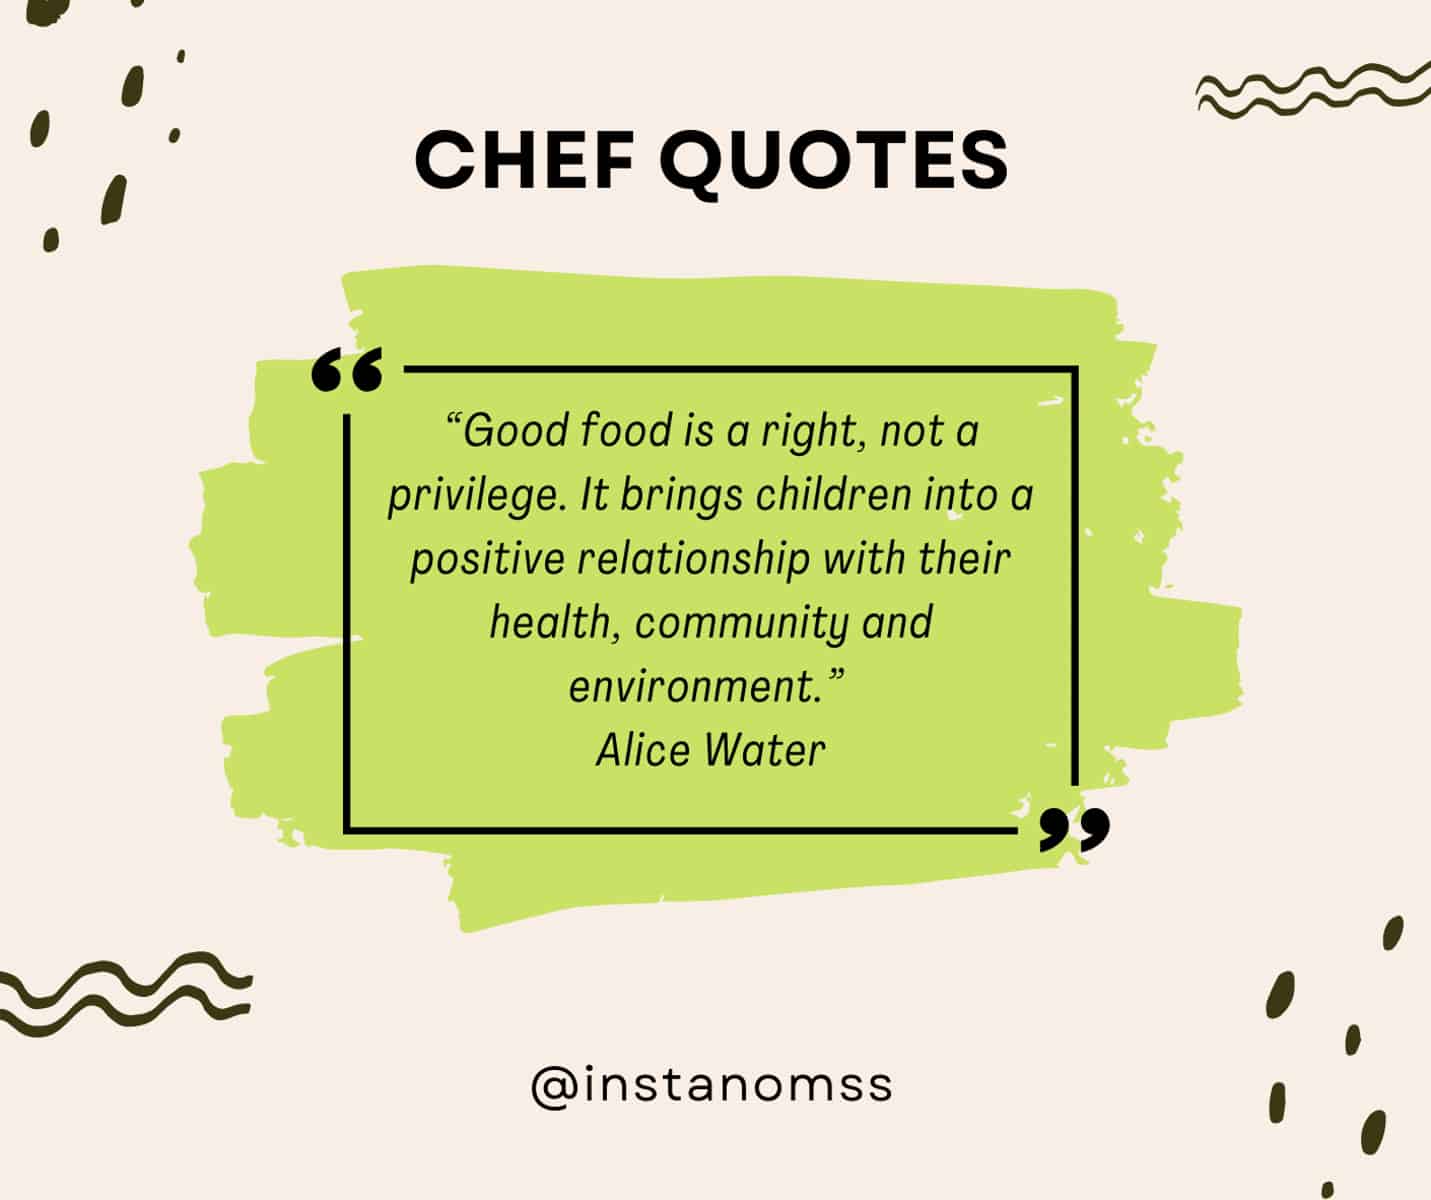 “Good food is a right, not a privilege. It brings children into a positive relationship with their health, community and environment.” Alice Water